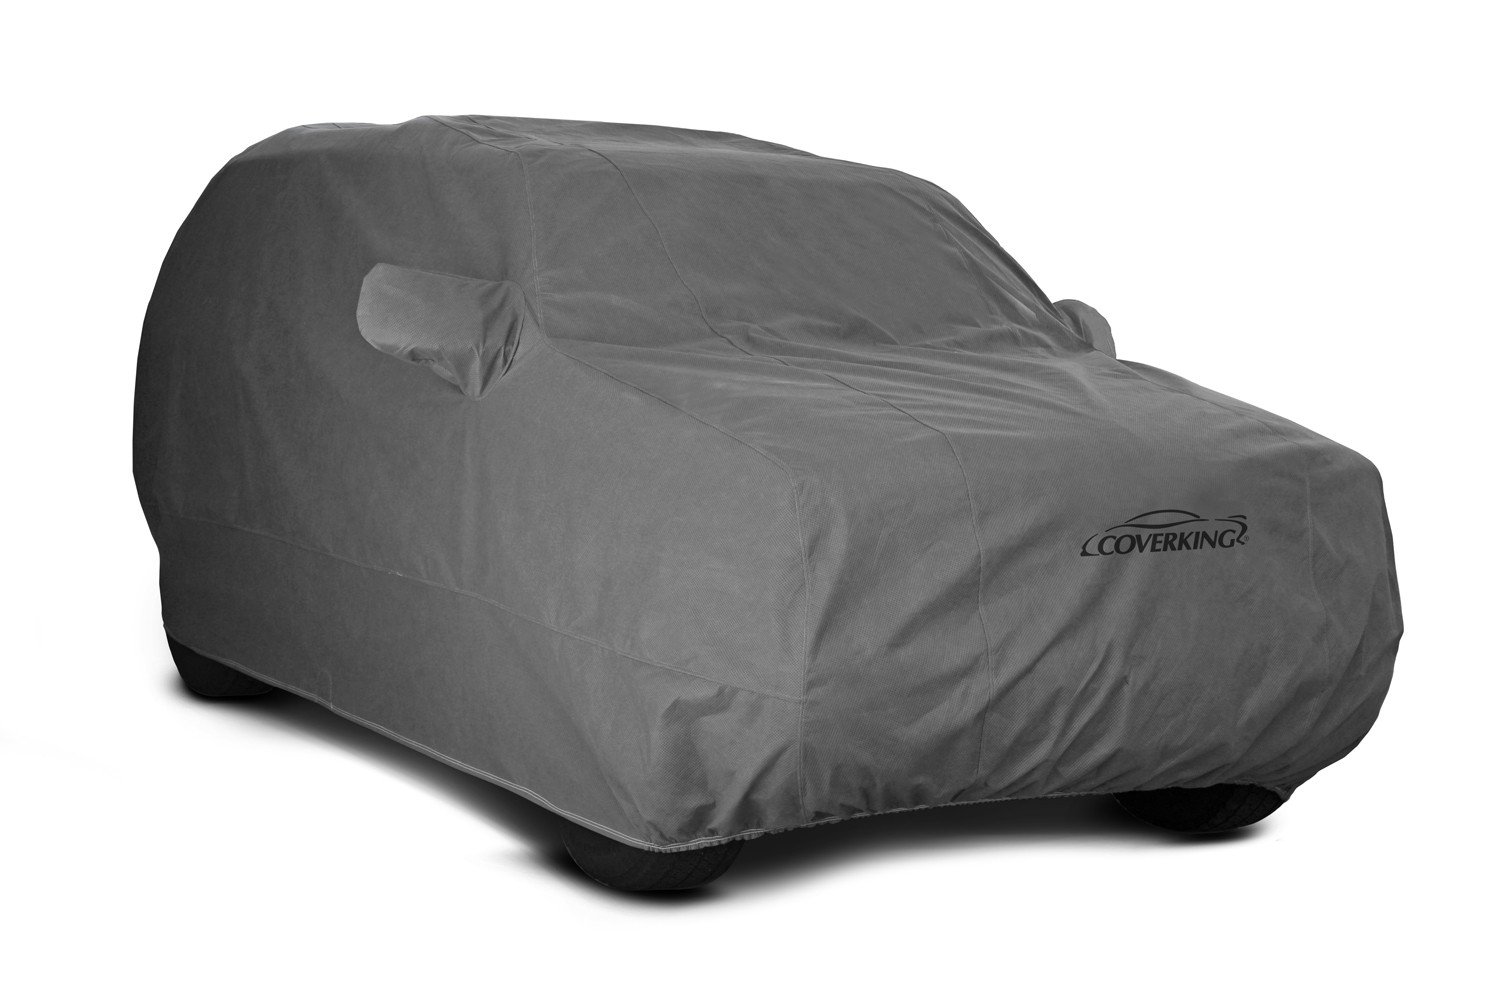 C6 Corvette CoverKing Coverbond Moderate Weather Cover